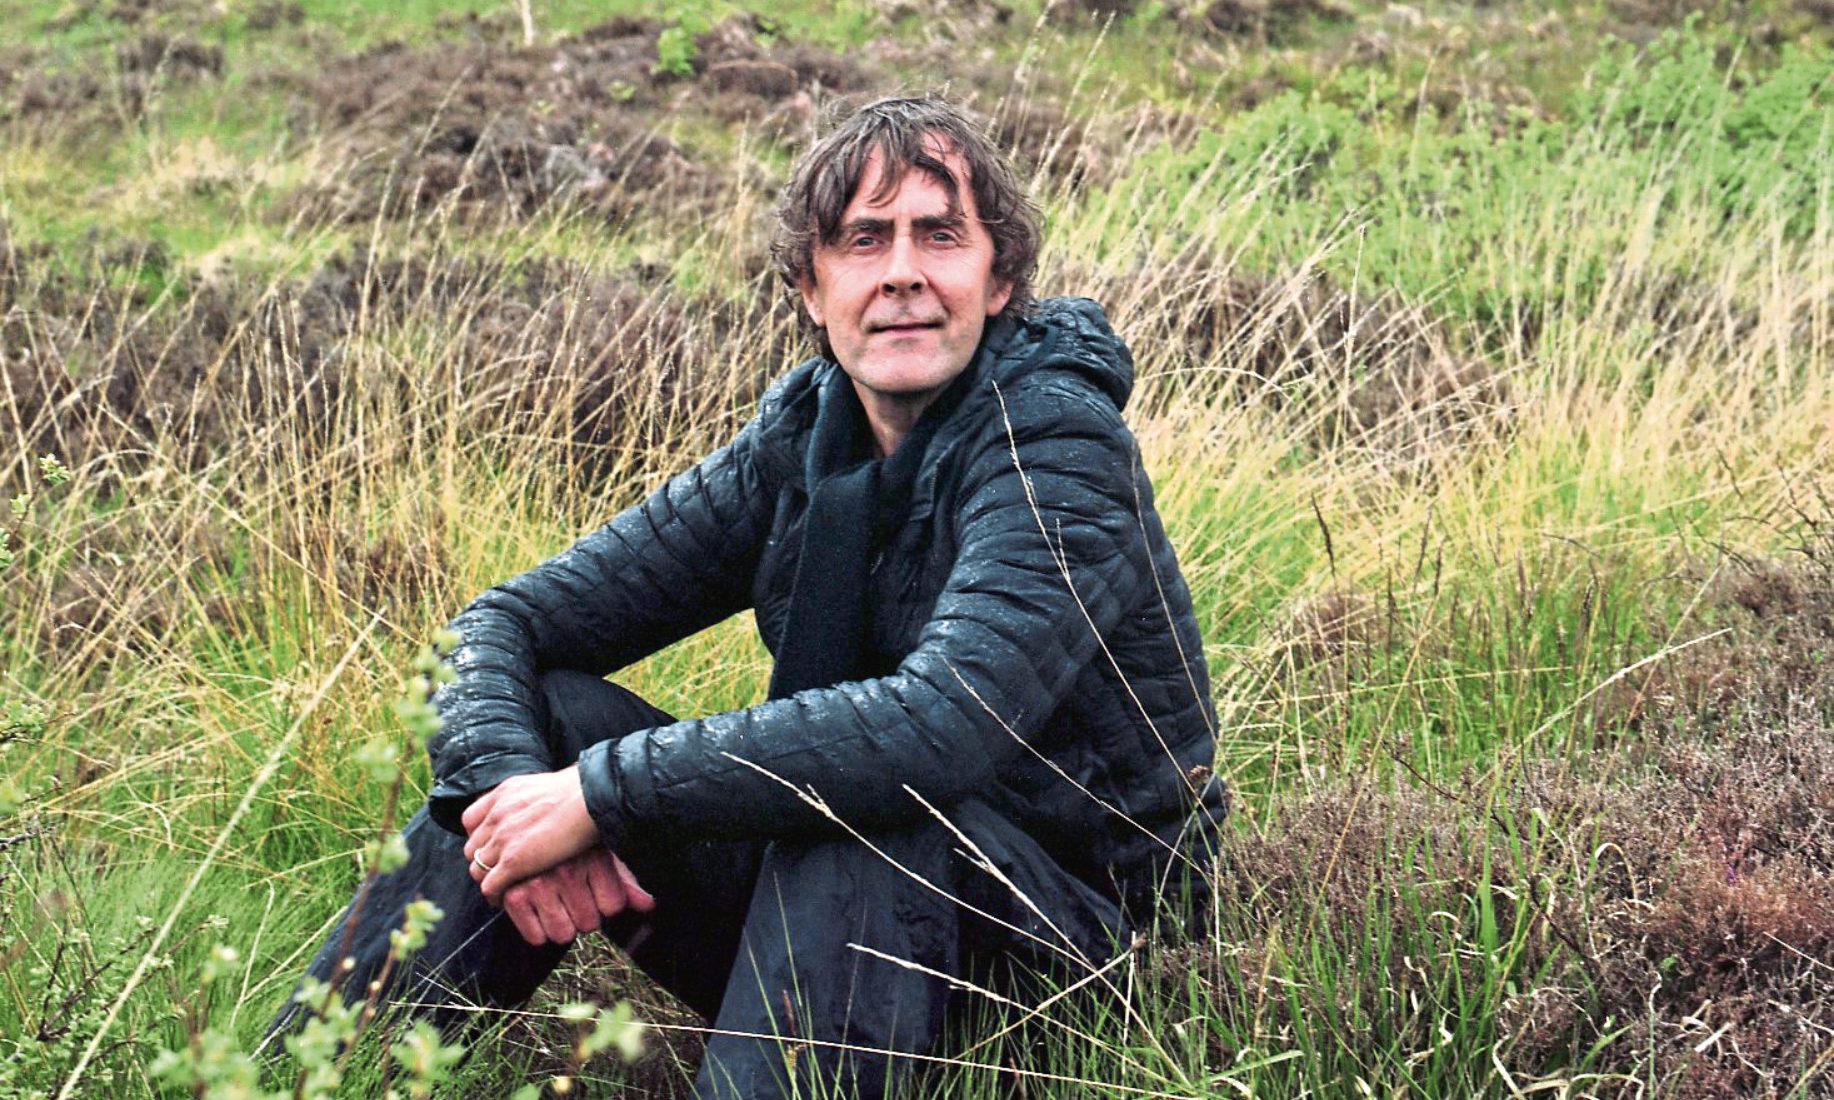 Artist and poet Alec Finlay is on a mission to make wild places more accessible for all.